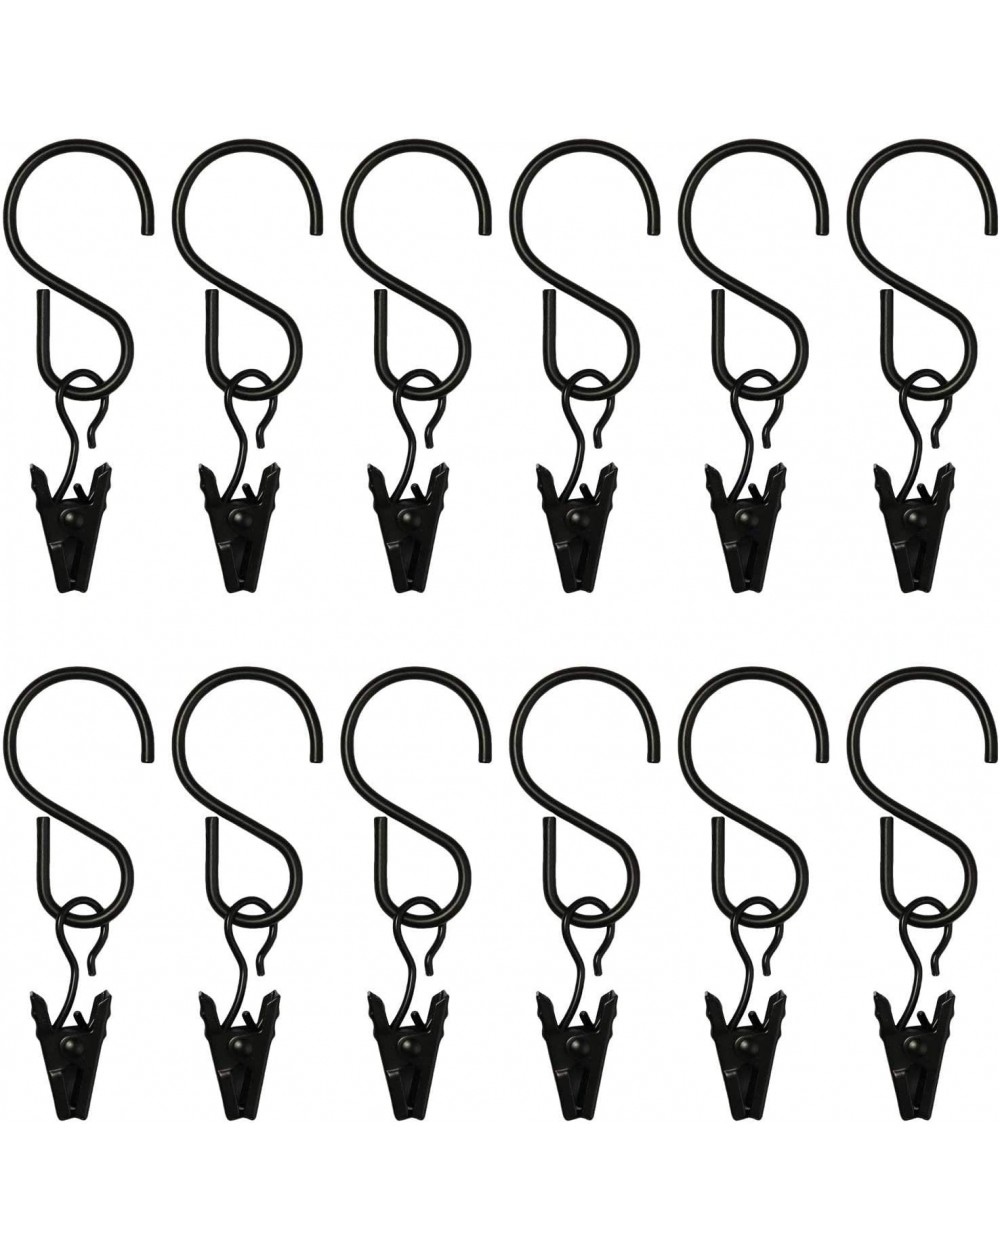 Outdoor Lighting Hooks 40 Pack Shower Curtain Rings Lighted Photo Clips String Lights with Hanging Hook Multifunction Hangers...